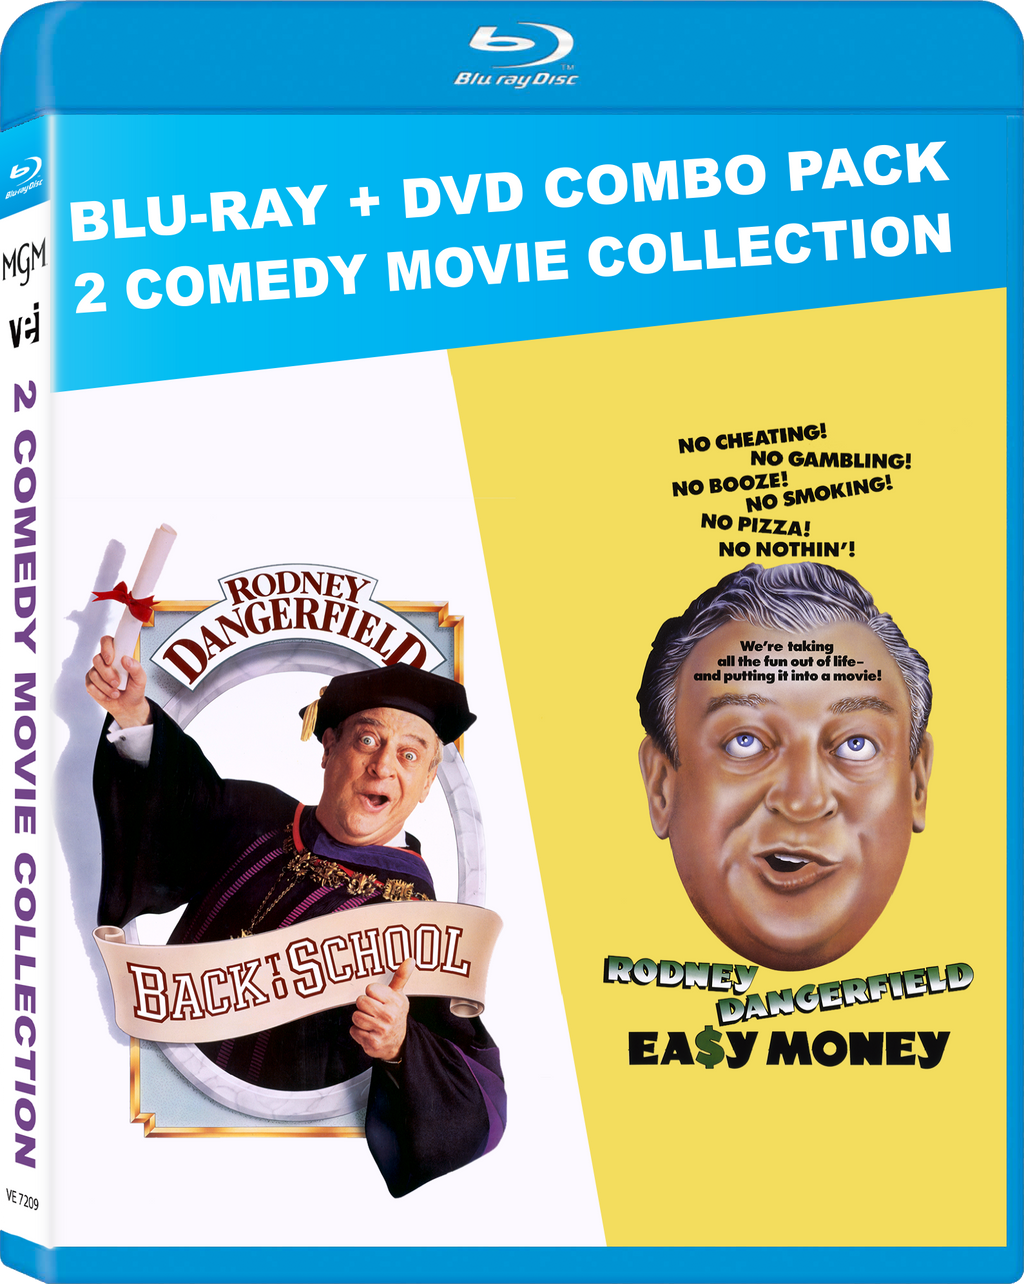 Blu-ray + DVD Combo Pack - 2 COMEDY MOVIE COLLECTION [Blu-ray] #7209